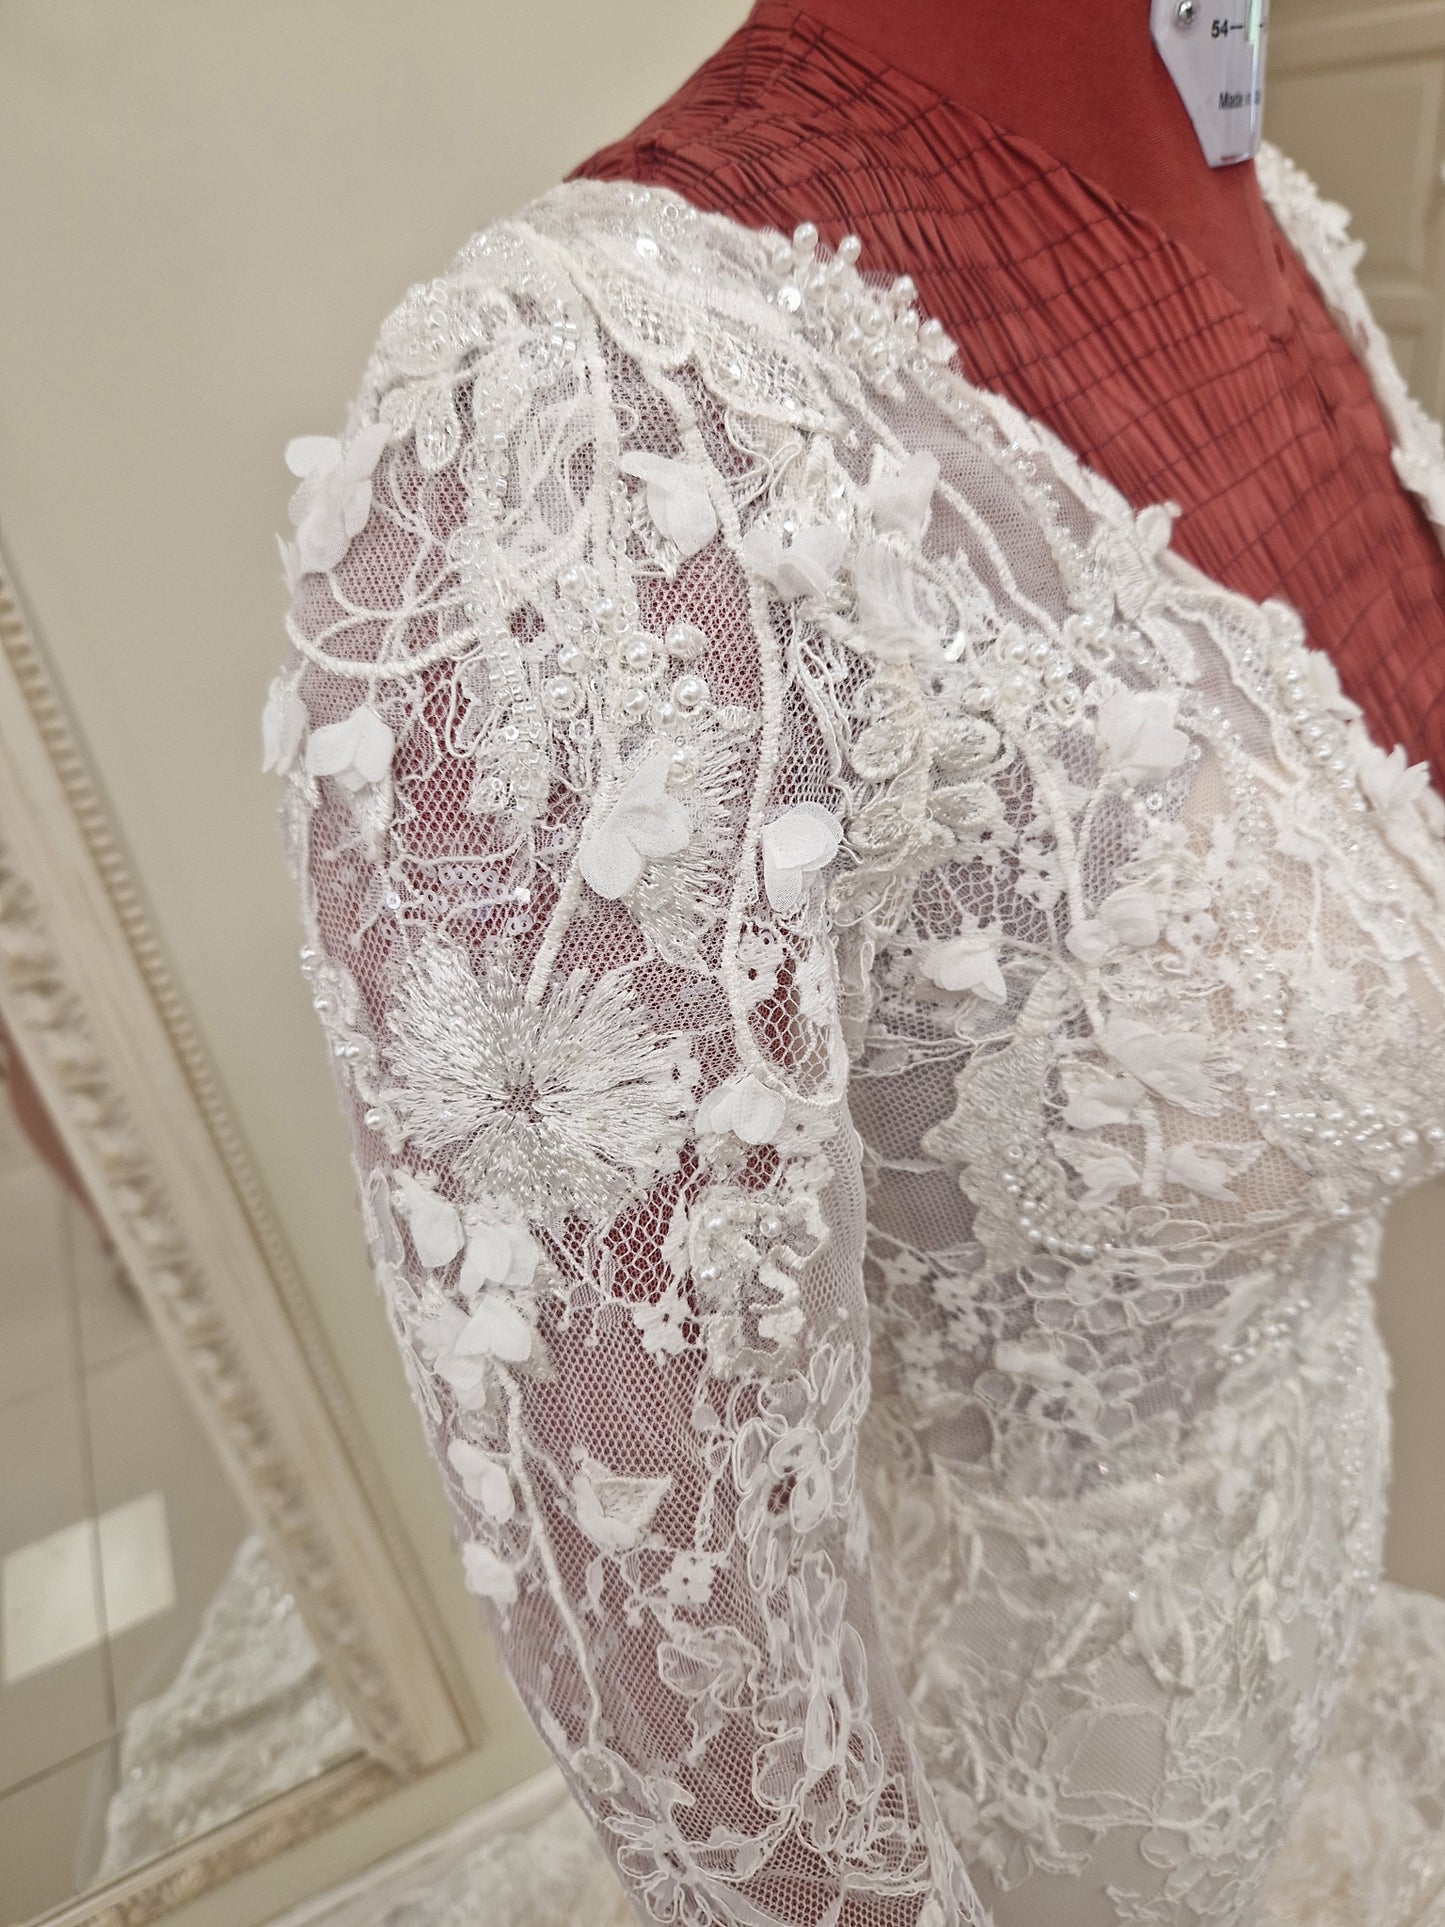 Detail at the shoulder of the Amara gown - hand attached lace appliques with lots of beading, sequins and pearls.